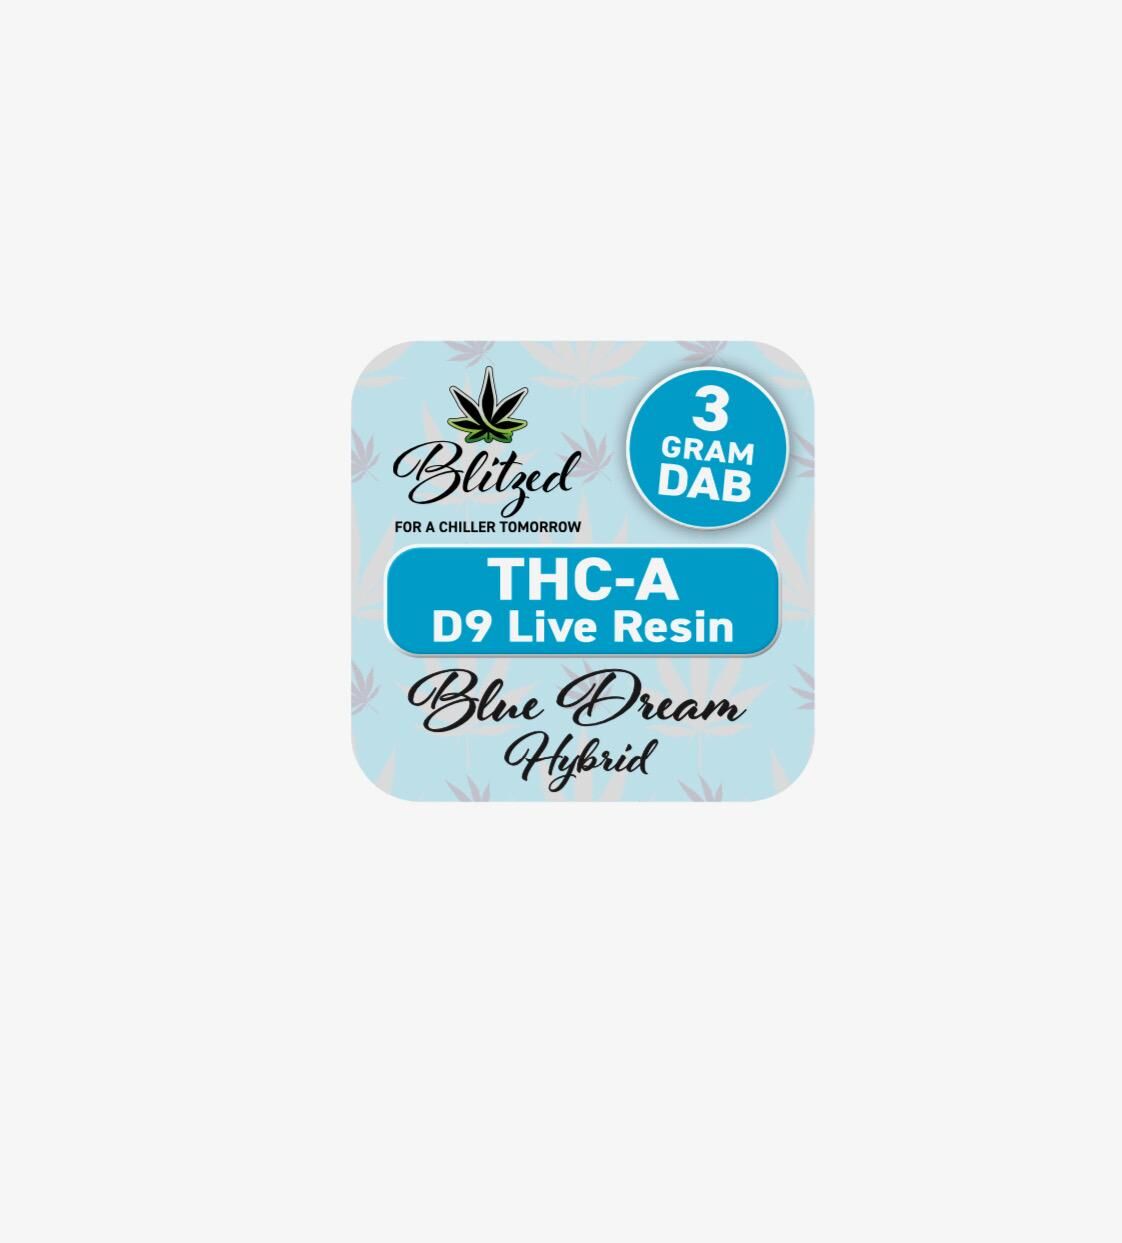 Blue Dream Hybrid Blitzed Live Resin Dabs | Relax with 3g THCa/Delta 9 Concentrates | US Farm Bill Compliant